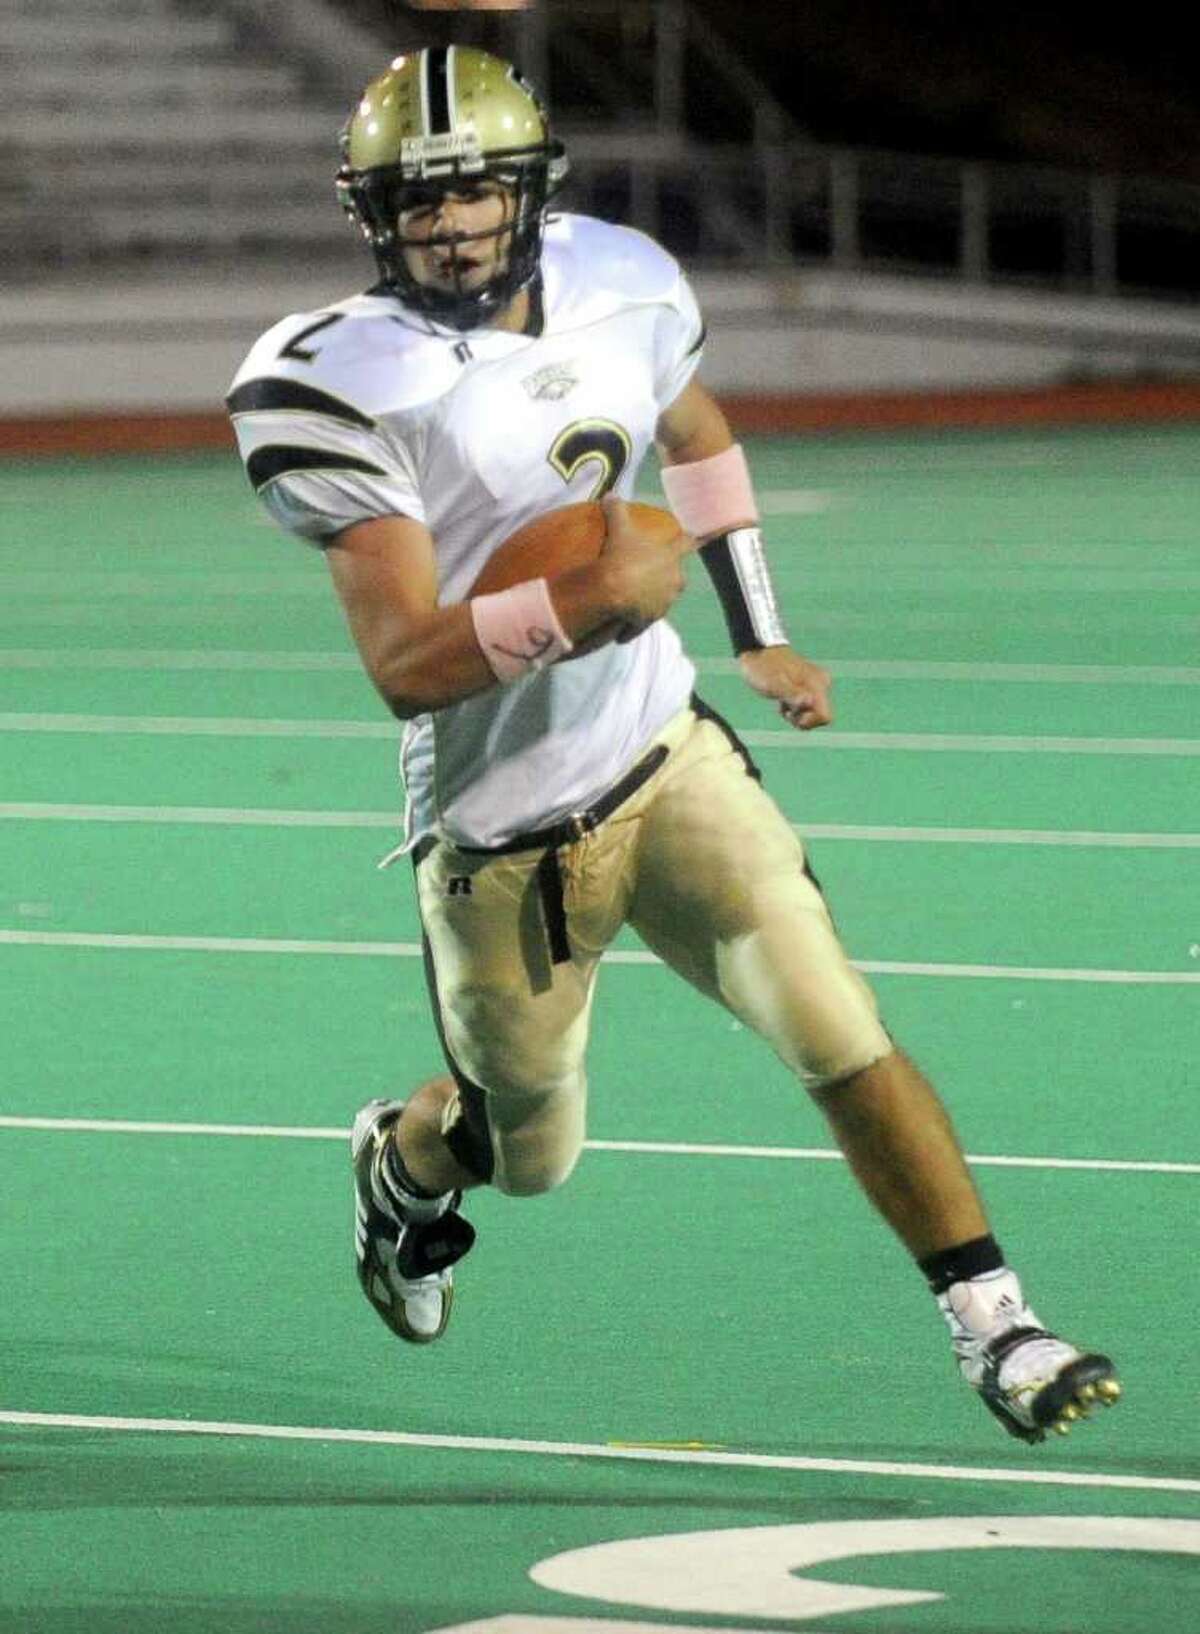 Trumbull's Phil Terio runs the ball during Friday's game at Bridgeport Central High School on October 8, 2010.